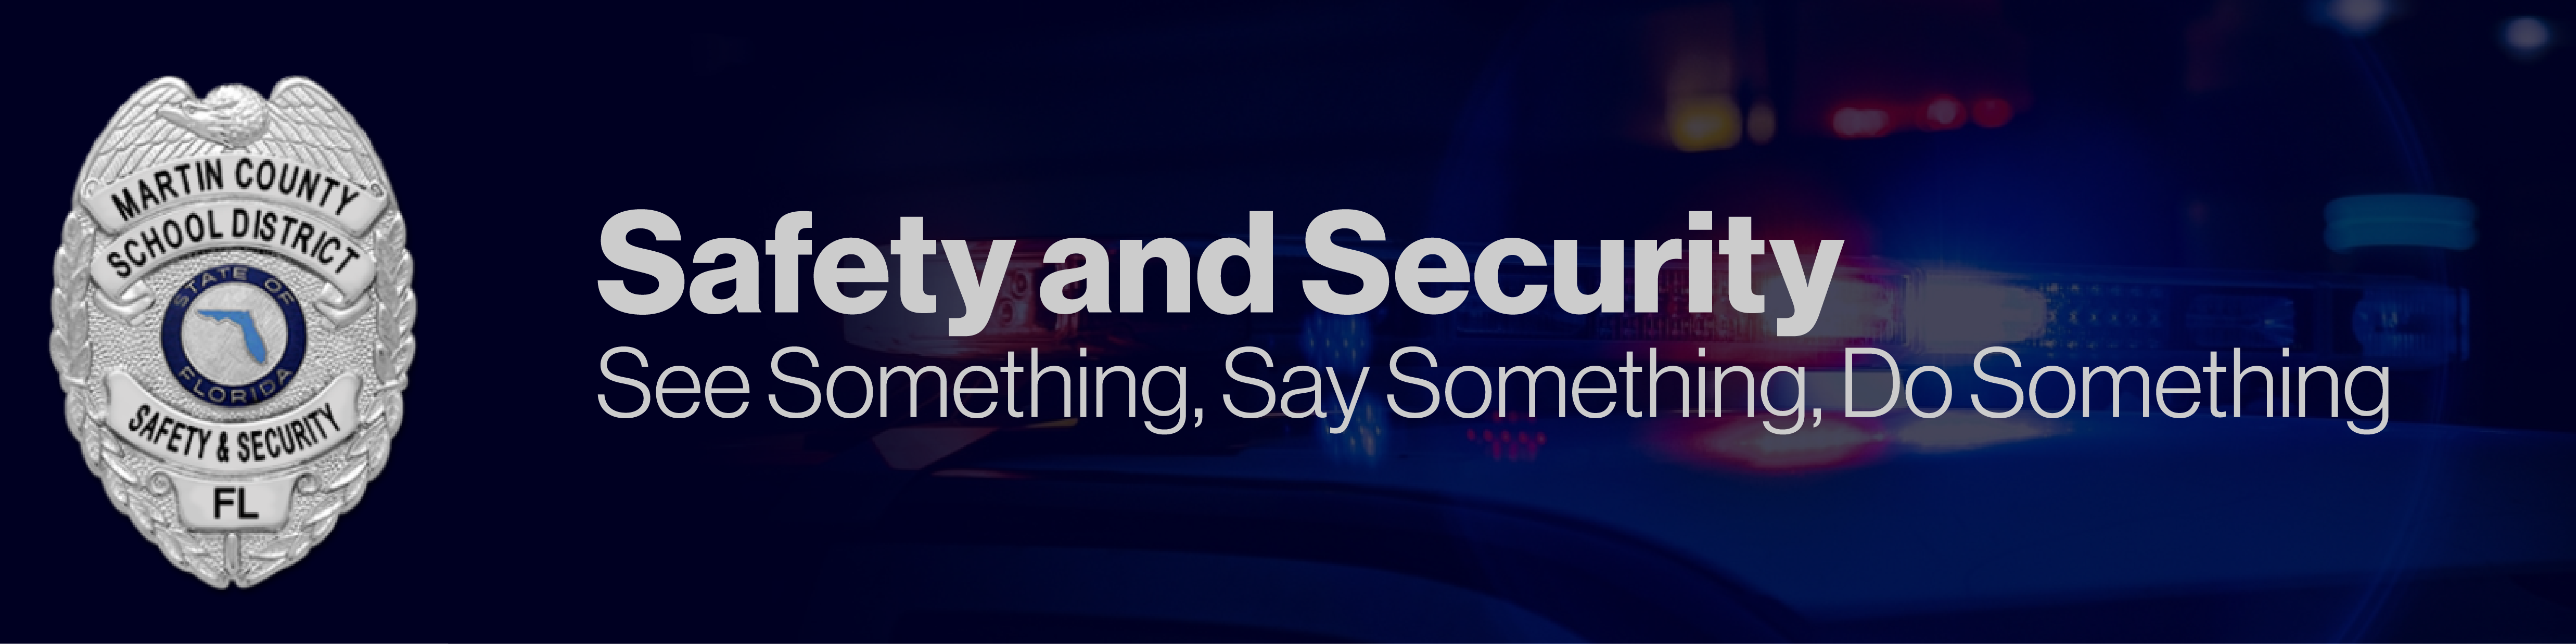 Safety and Security - See Something, Say Something, Do Something